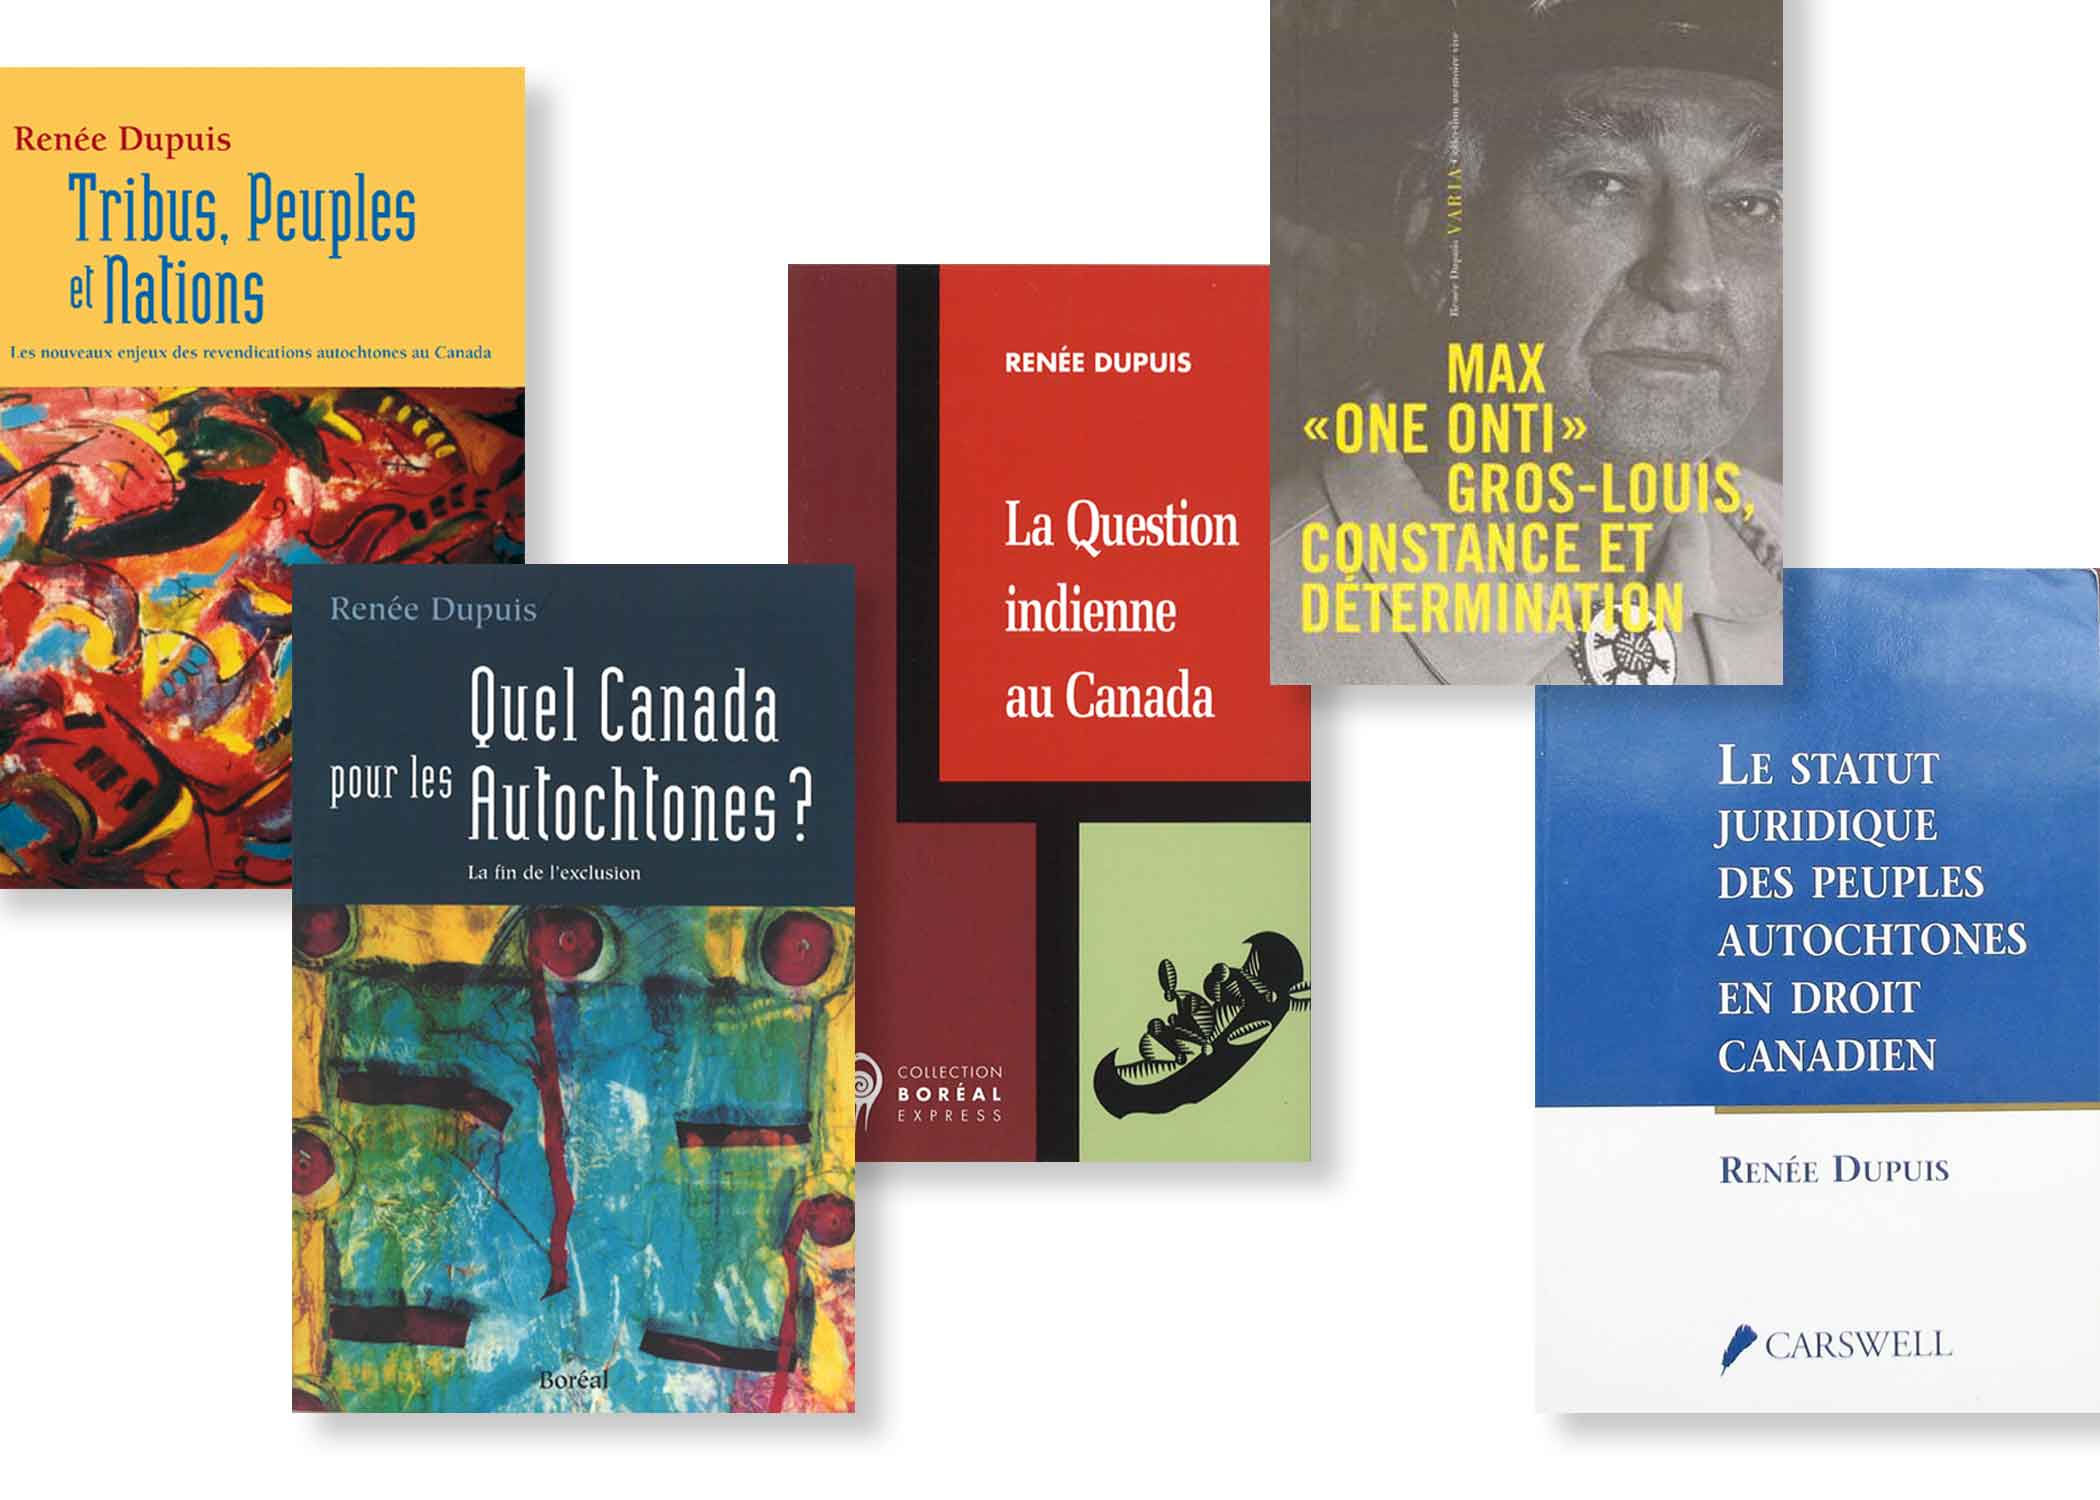 In 2001, Senator Dupuis won the Governor General's Award for non-fiction for her book Quel Canada pour les Autochtones? La fin de l'exclusion (2001), which was later published in English as Justice for Canada's Aboriginal Peoples (2002). Senator Dupuis's other publications include Max "One Onti" Gros-Louis, Constance et détermination (2008), Tribus, Peuples et Nations (1997) and La question indienne au Canada (1991). Many of her articles have appeared in academic journals and popular magazines.